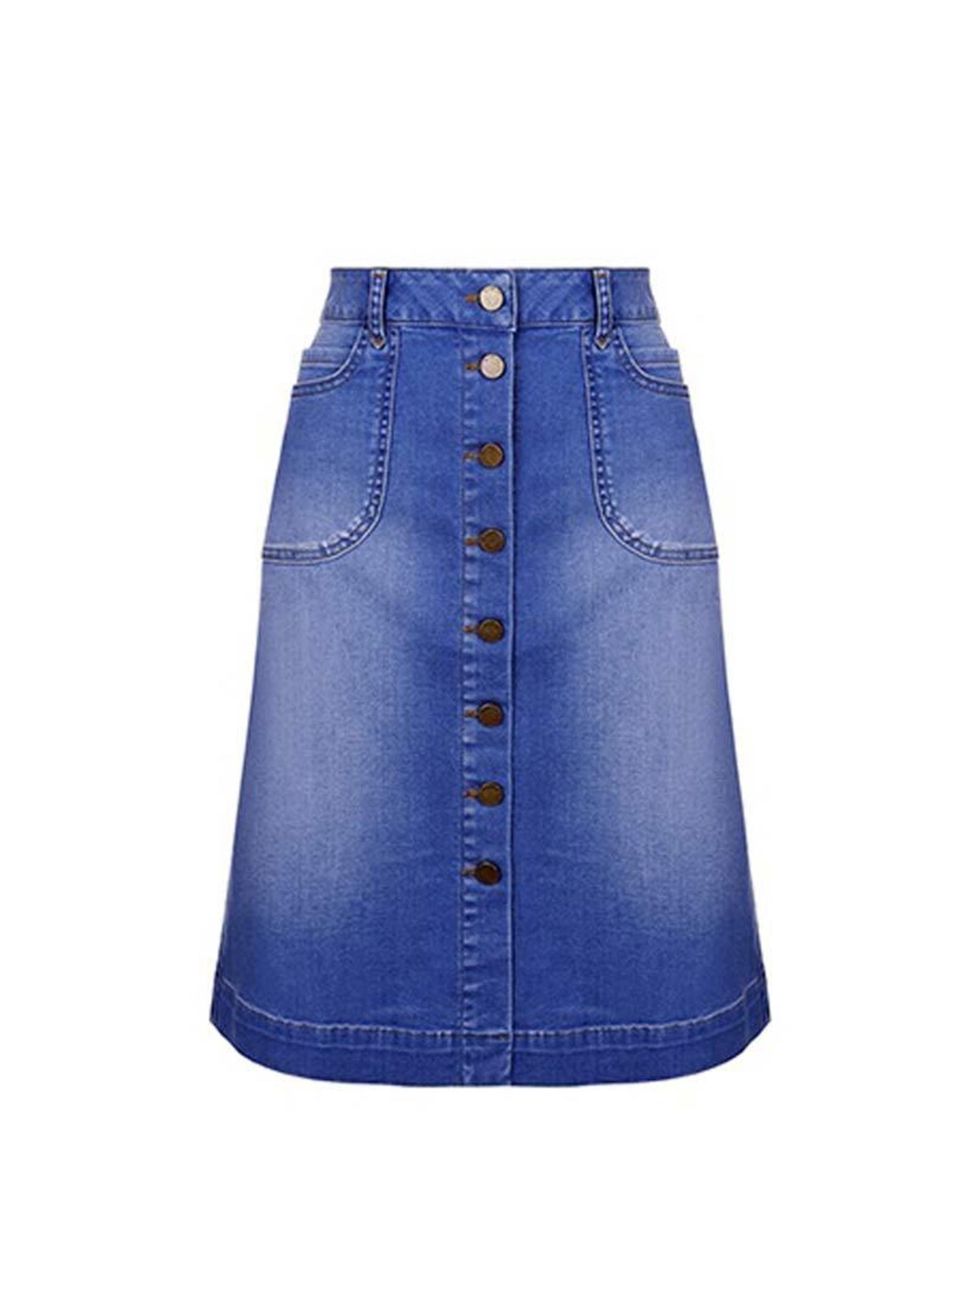 <p>Our denim pick of the season has to be the button-through, a-line denim skirt.</p>

<p><a href="http://uk.monsoon.co.uk/view/product/uk_catalog/mon_1,mon_1.11/7411333920" target="_blank">Monsoon</a> skirt, £45</p>